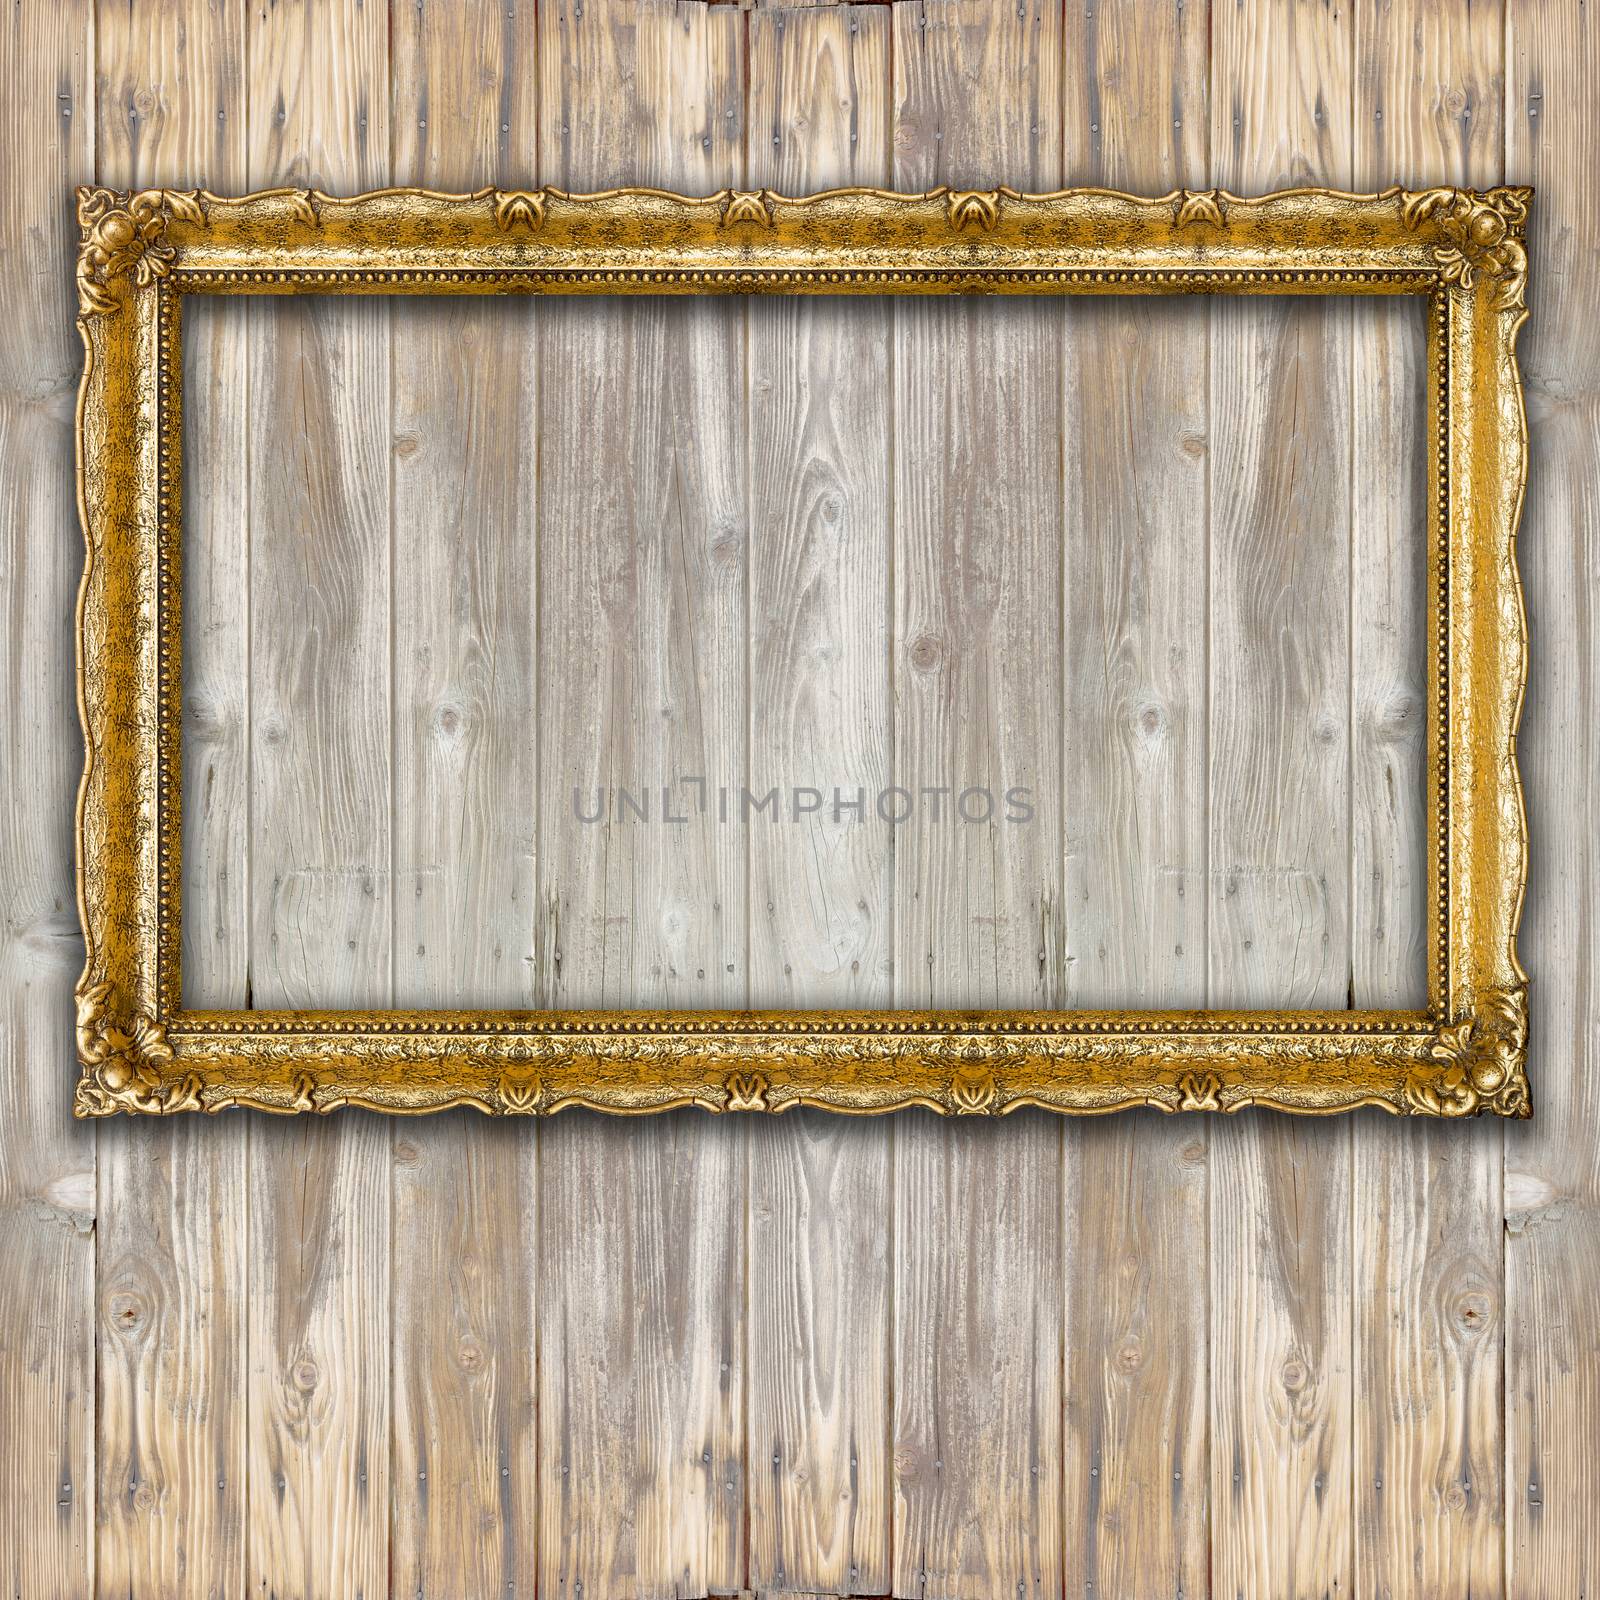 Retro Big Old Picture Frame on wooden baclground, graphick mockup element